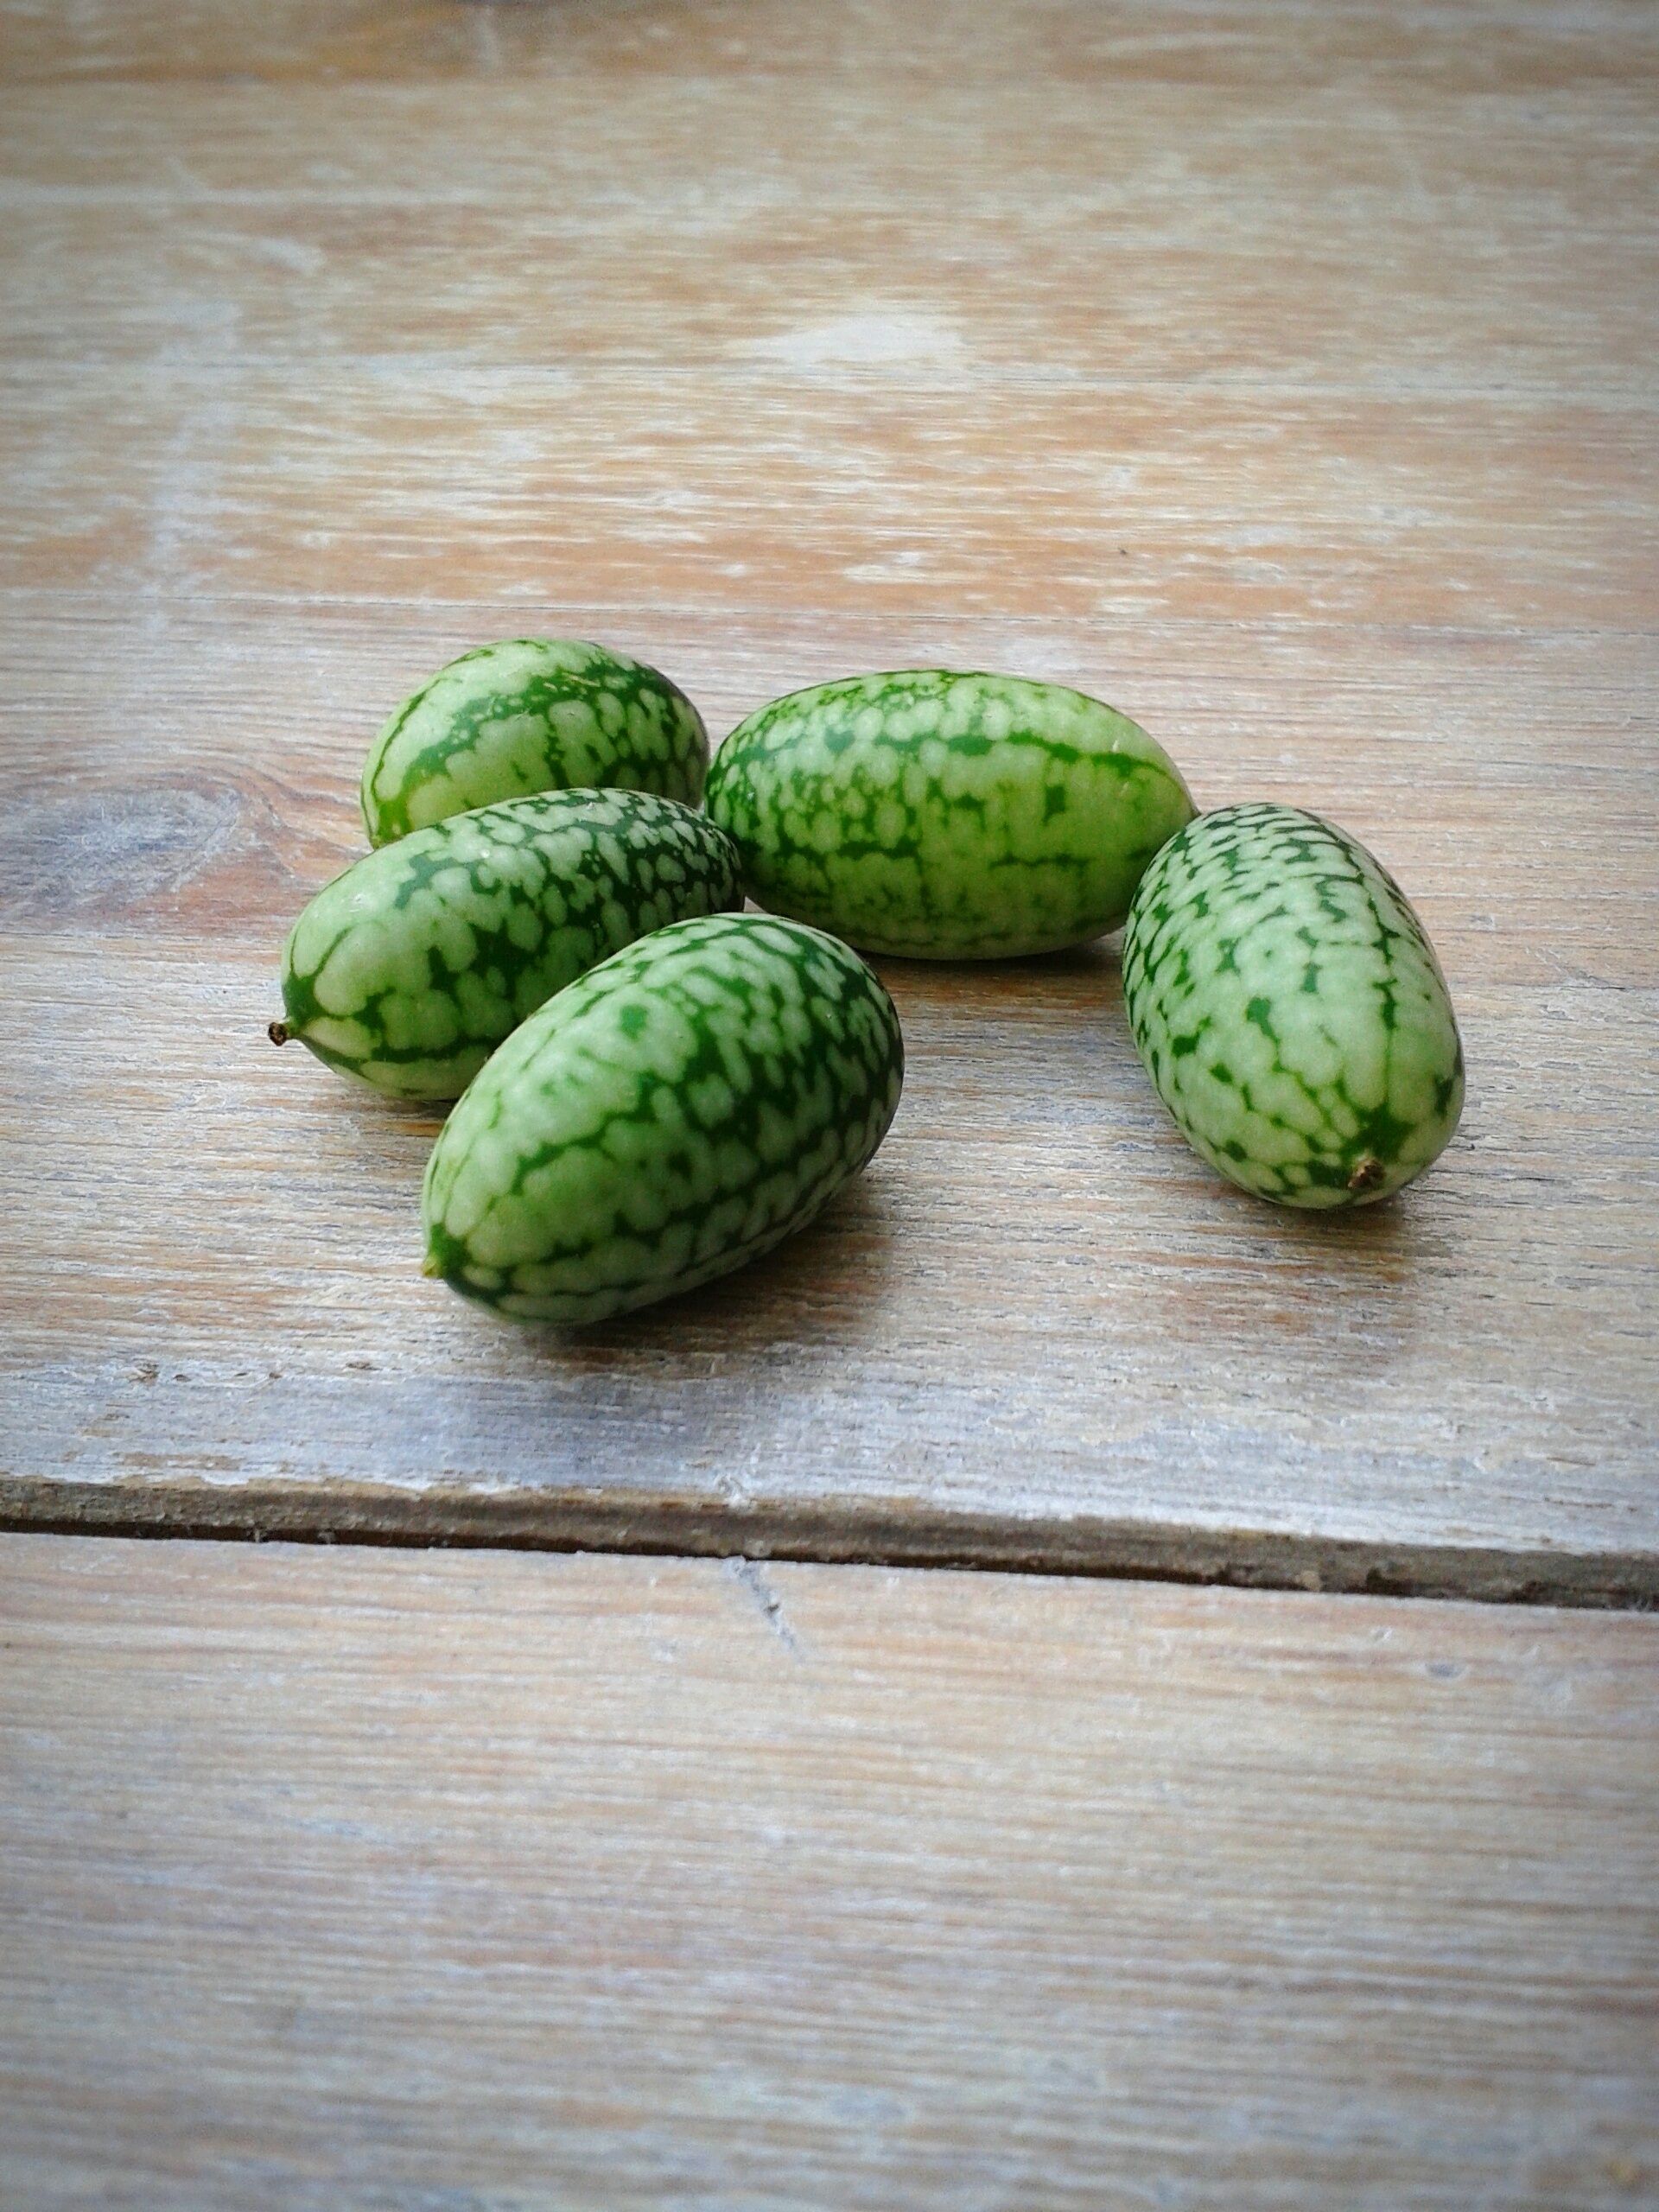 Cucamelon: Not the Love Child of a Cucumber and a Watermelon